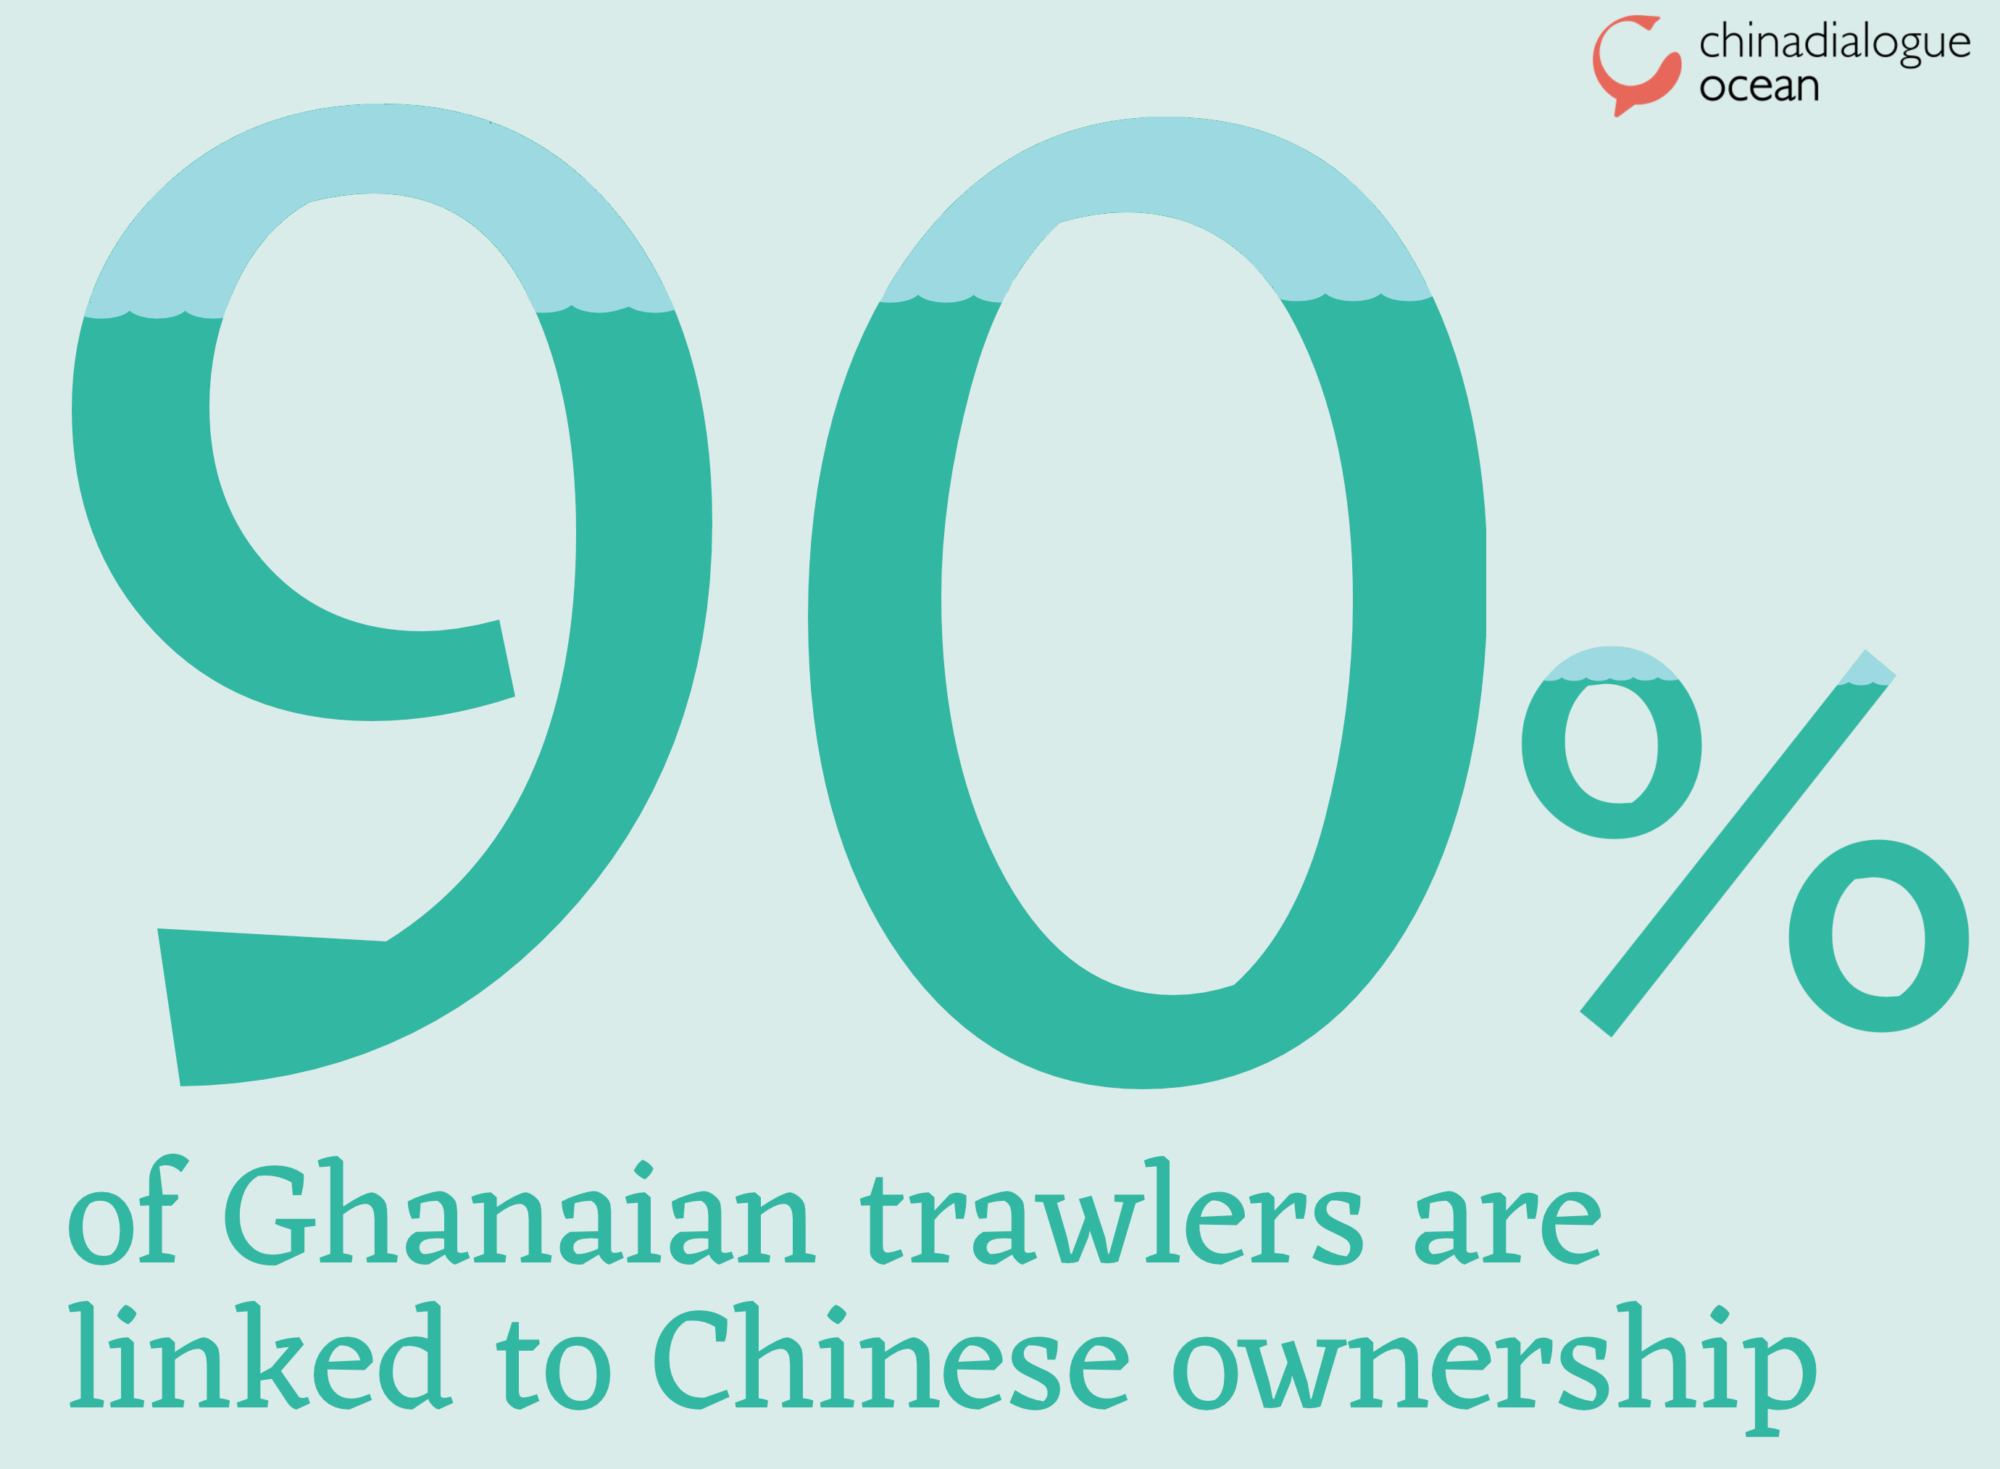 90% of Ghanaian trawlers are linked to Chinese ownership